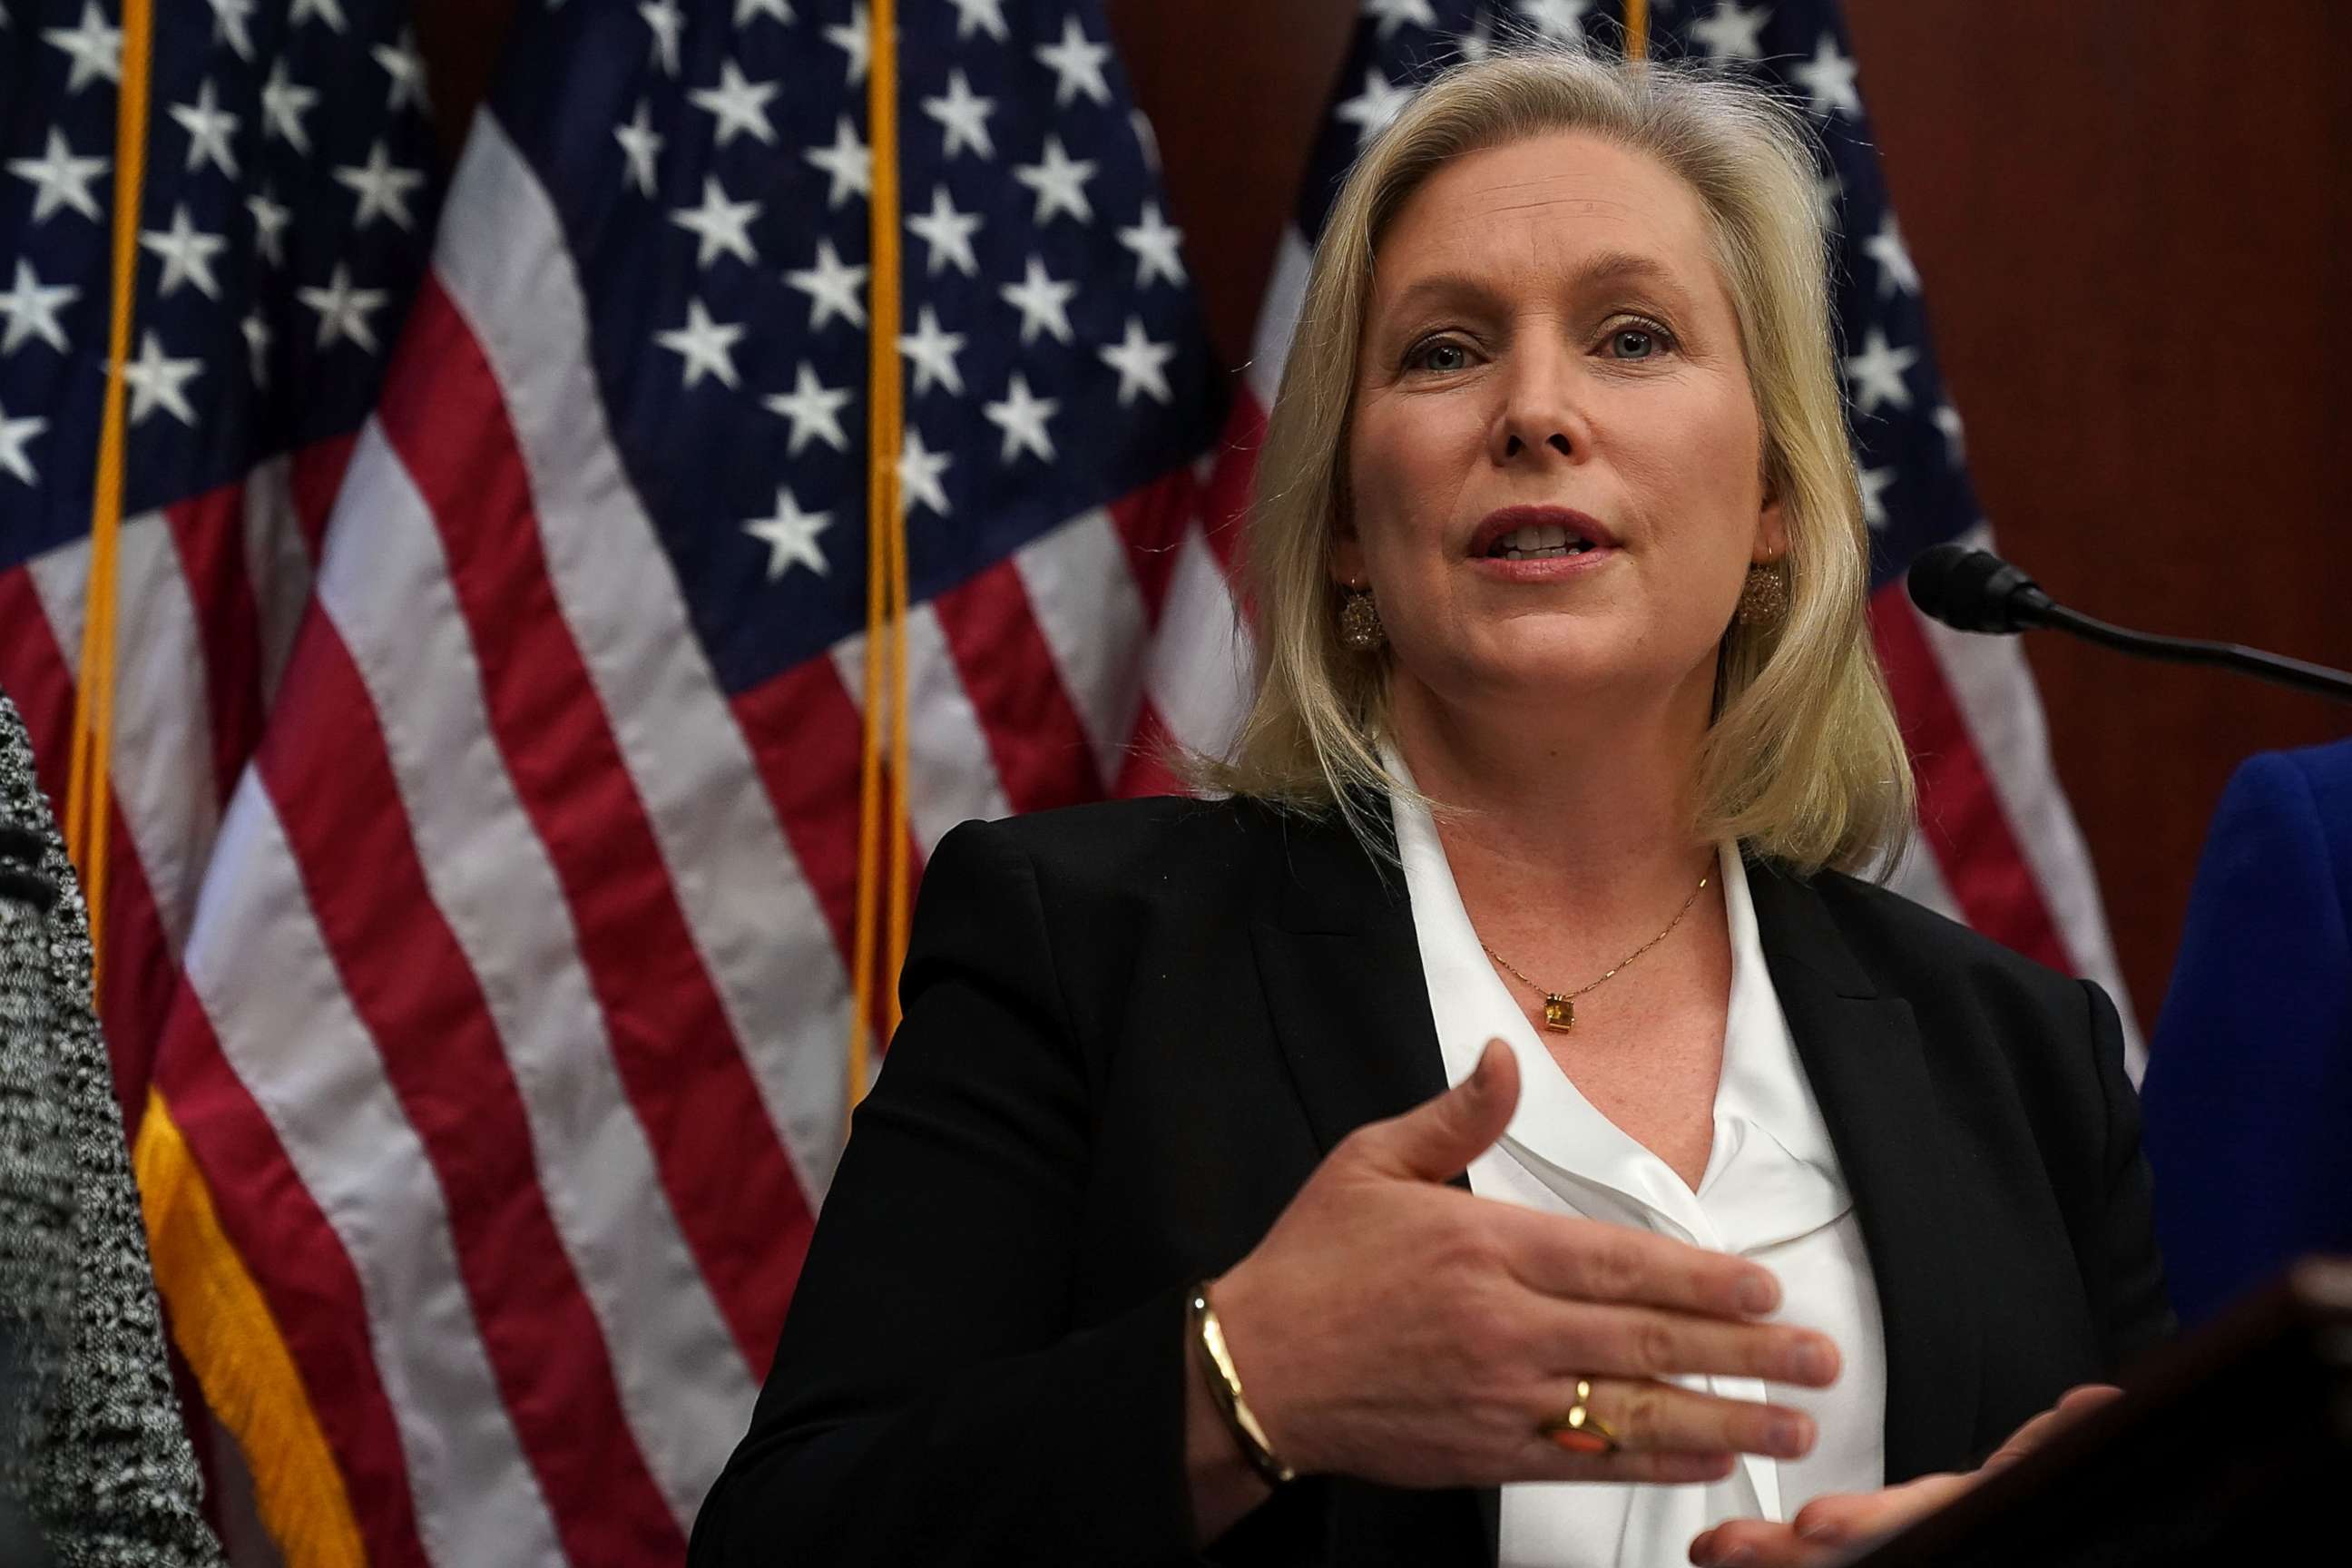 PHOTO: U.S. Sen. Kirsten Gillibrand (D-NY) speaks during a news conference, Dec. 6, 2017, on Capitol Hill in Washington. The lawmaker unveiled bipartisan legislation to help prevent sexual harassment.  